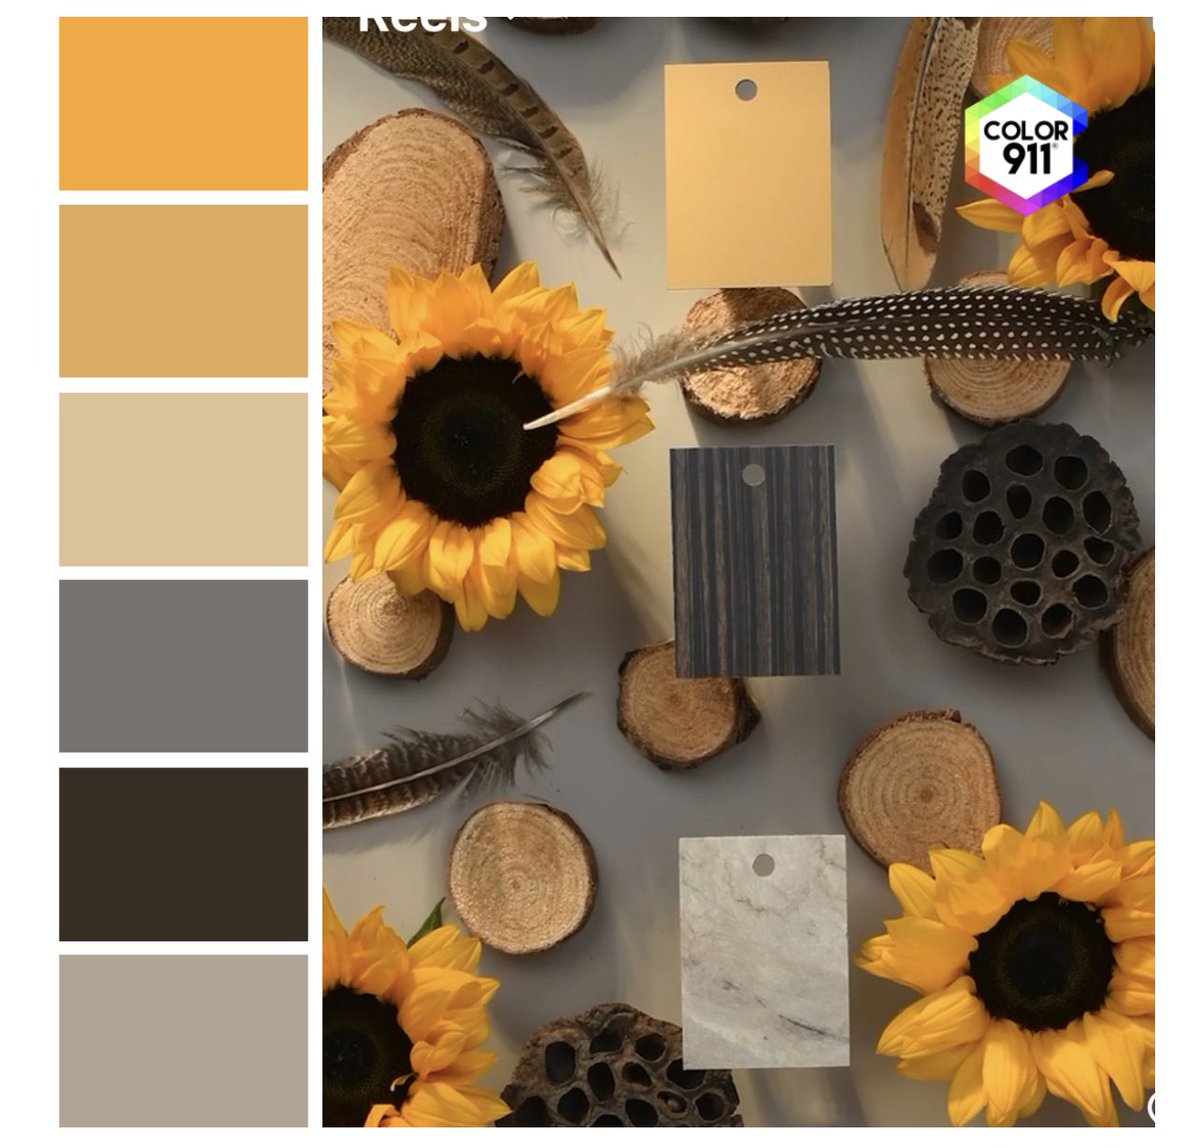 Capturing the delicious #colors of the season w the #Color911 #app helps remember or match them. photo: @formicagroup! Looking for #inspiration from a #color expert? Try Color911, Color911.com I think you’ll love it! #interiordesign #designer #kitchen #bathroom #design